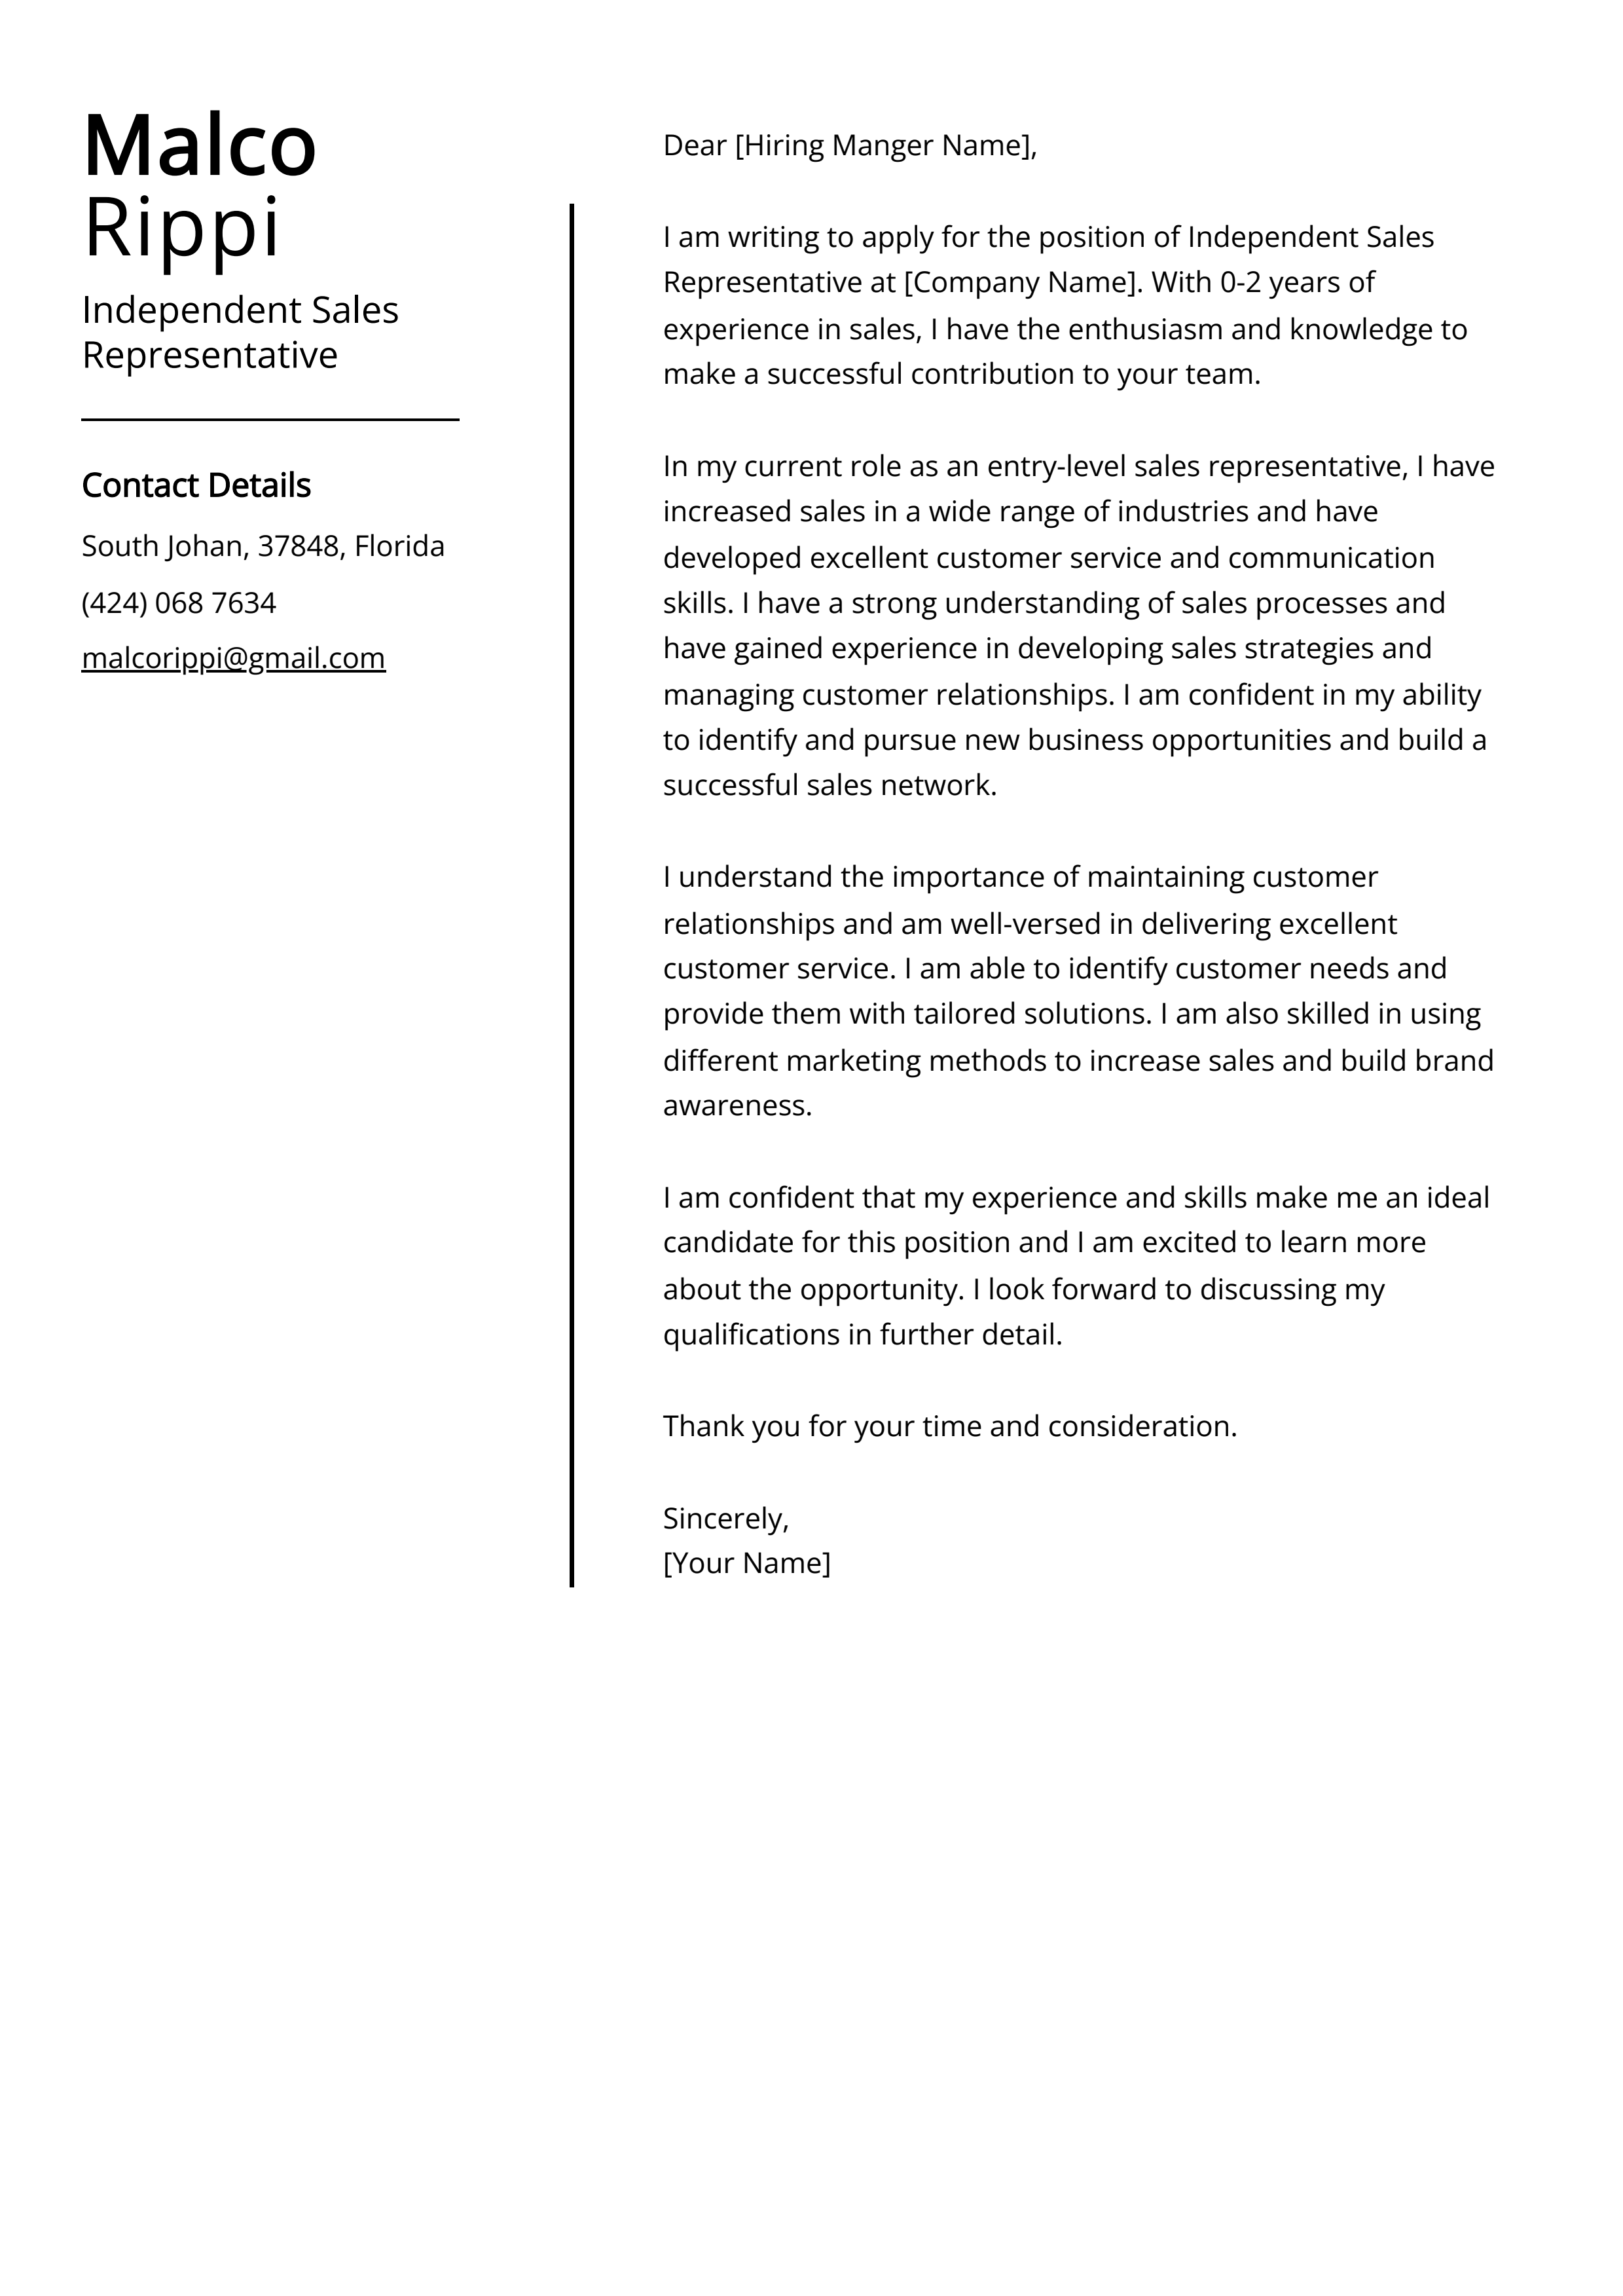 Independent Sales Representative Cover Letter Example